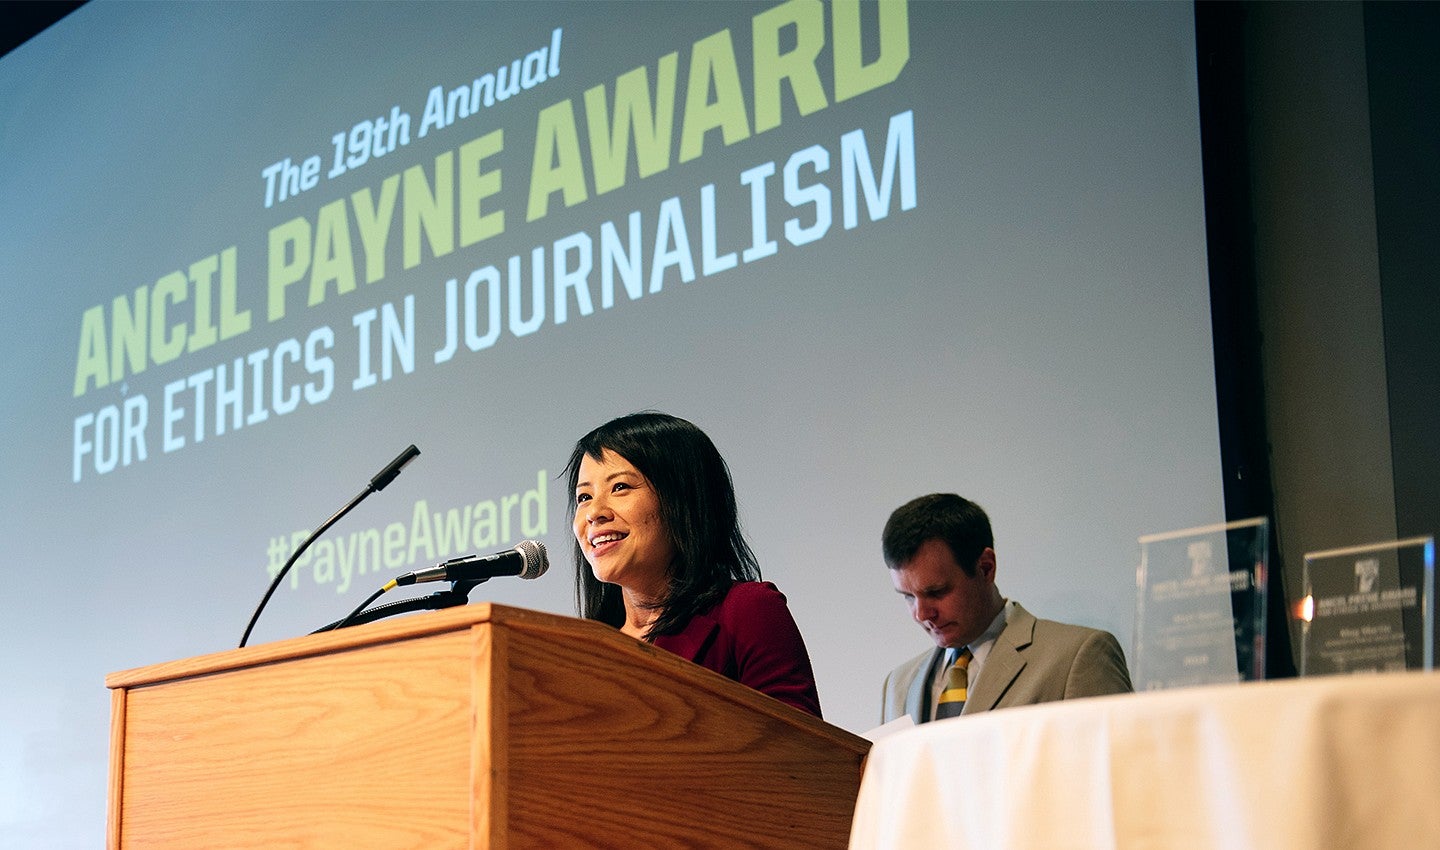 Ancil Payne Award for Ethics in Journalism 